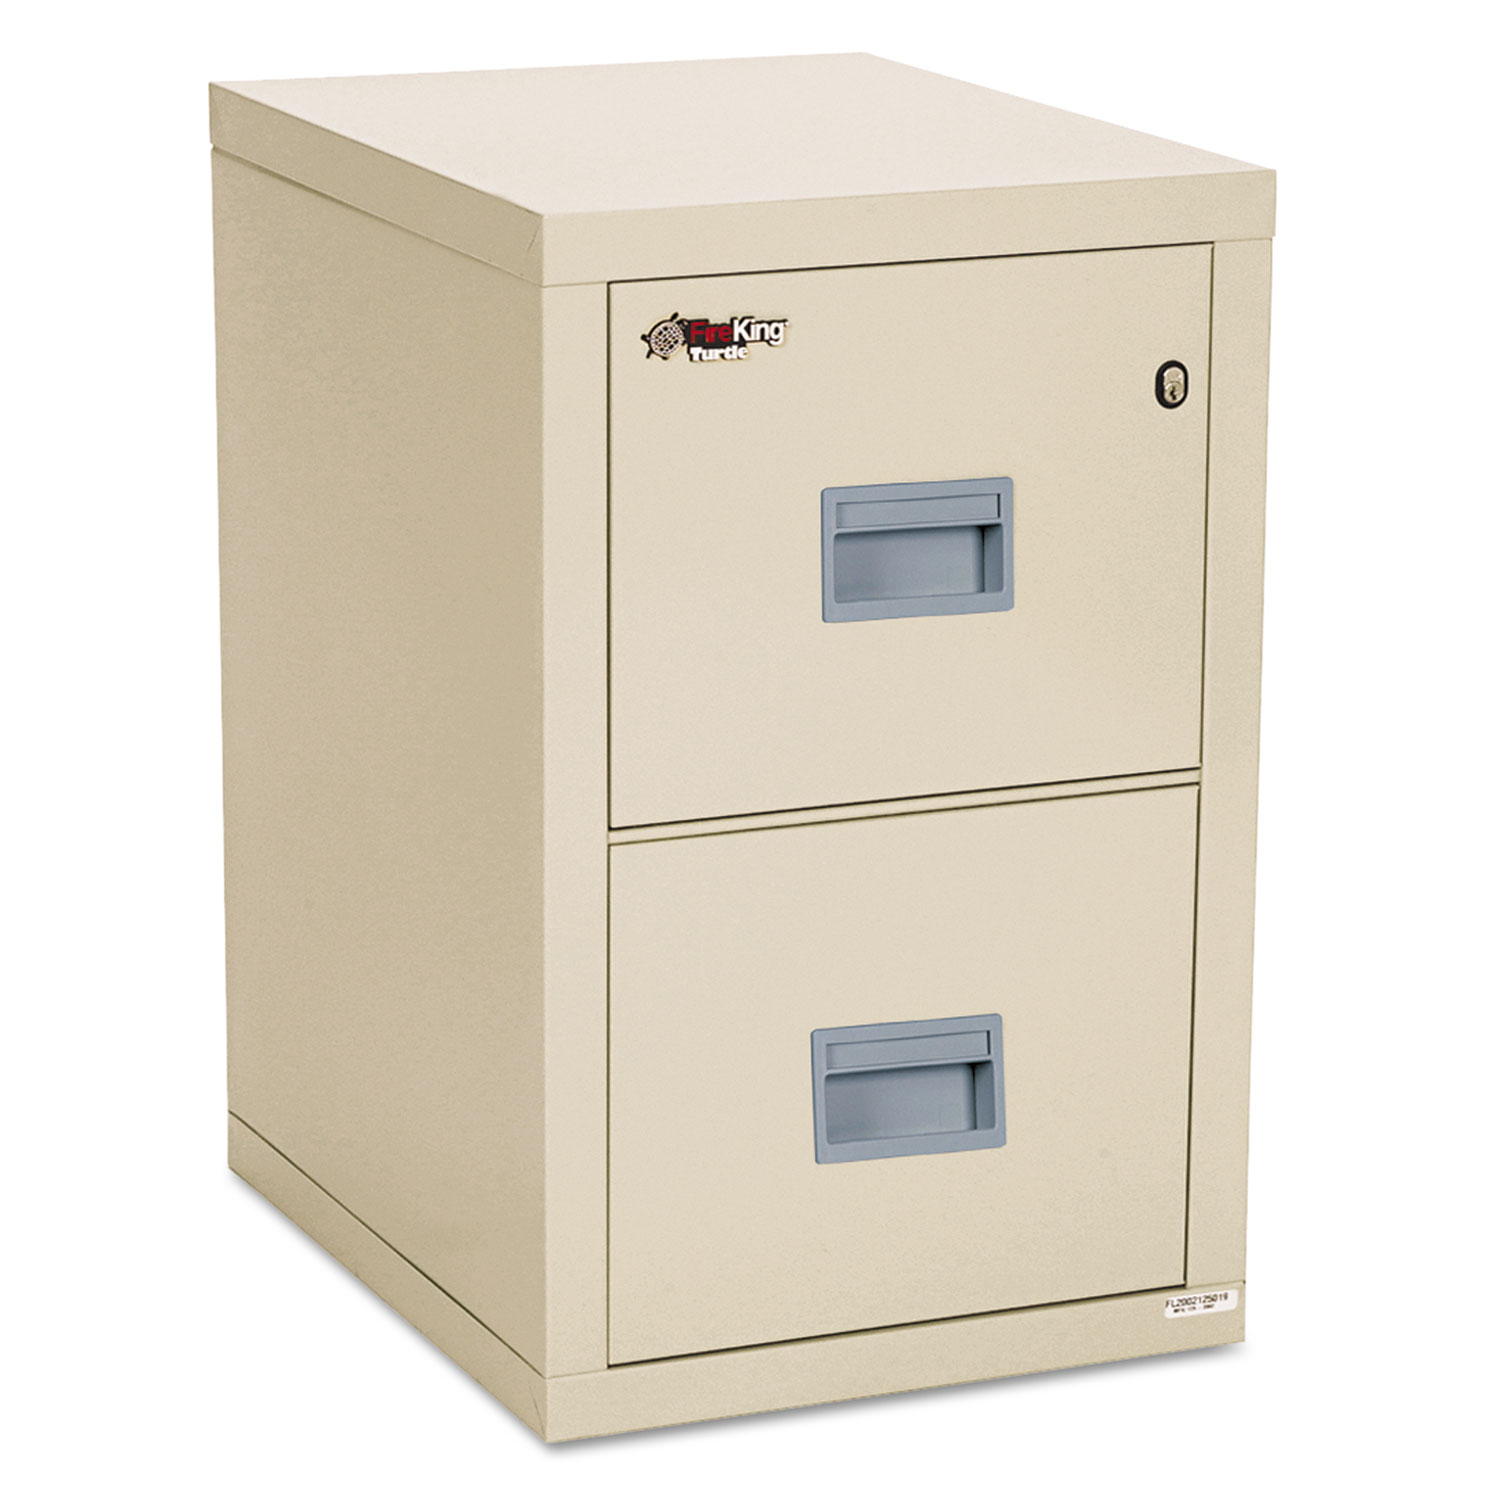  FireKing 2R1822-CPA Turtle Two-Drawer File, 17.75w x 22.13d x 27.75h, UL Listed 350° for Fire, Parchment (FIR2R1822CPA) 